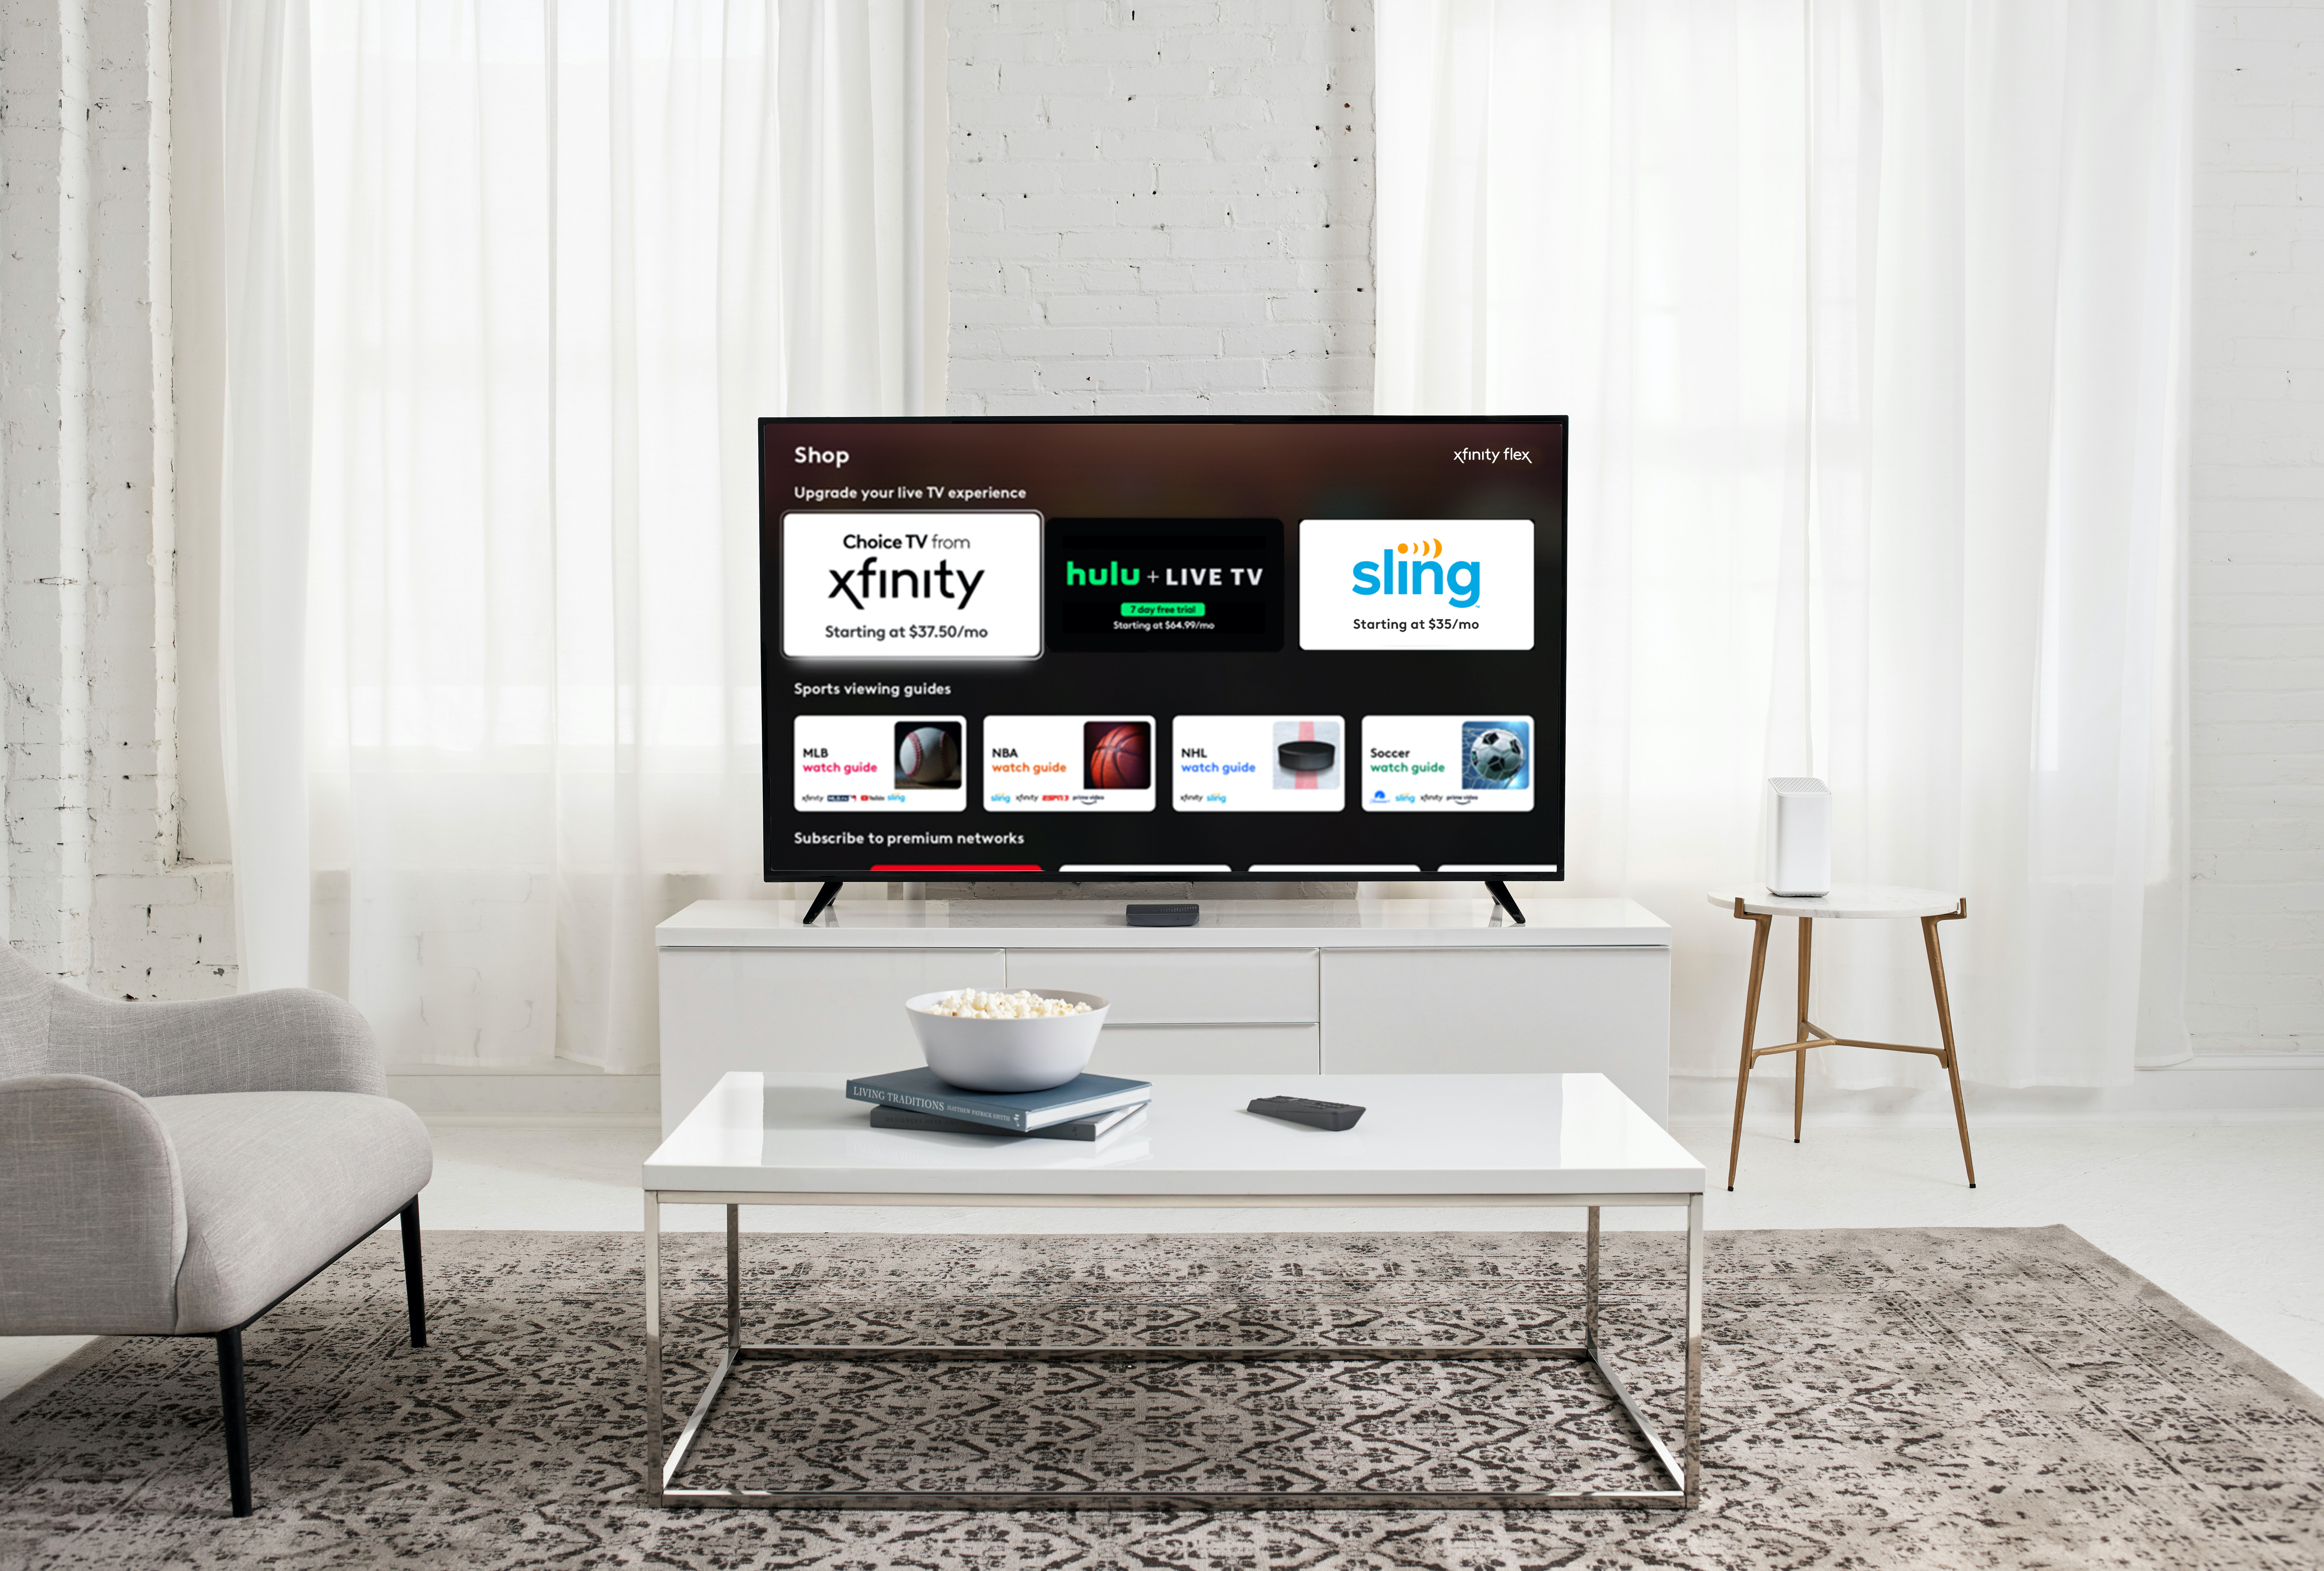 Comcasts Xfinity Flex Adds Support for Hulu + Live TV Next TV